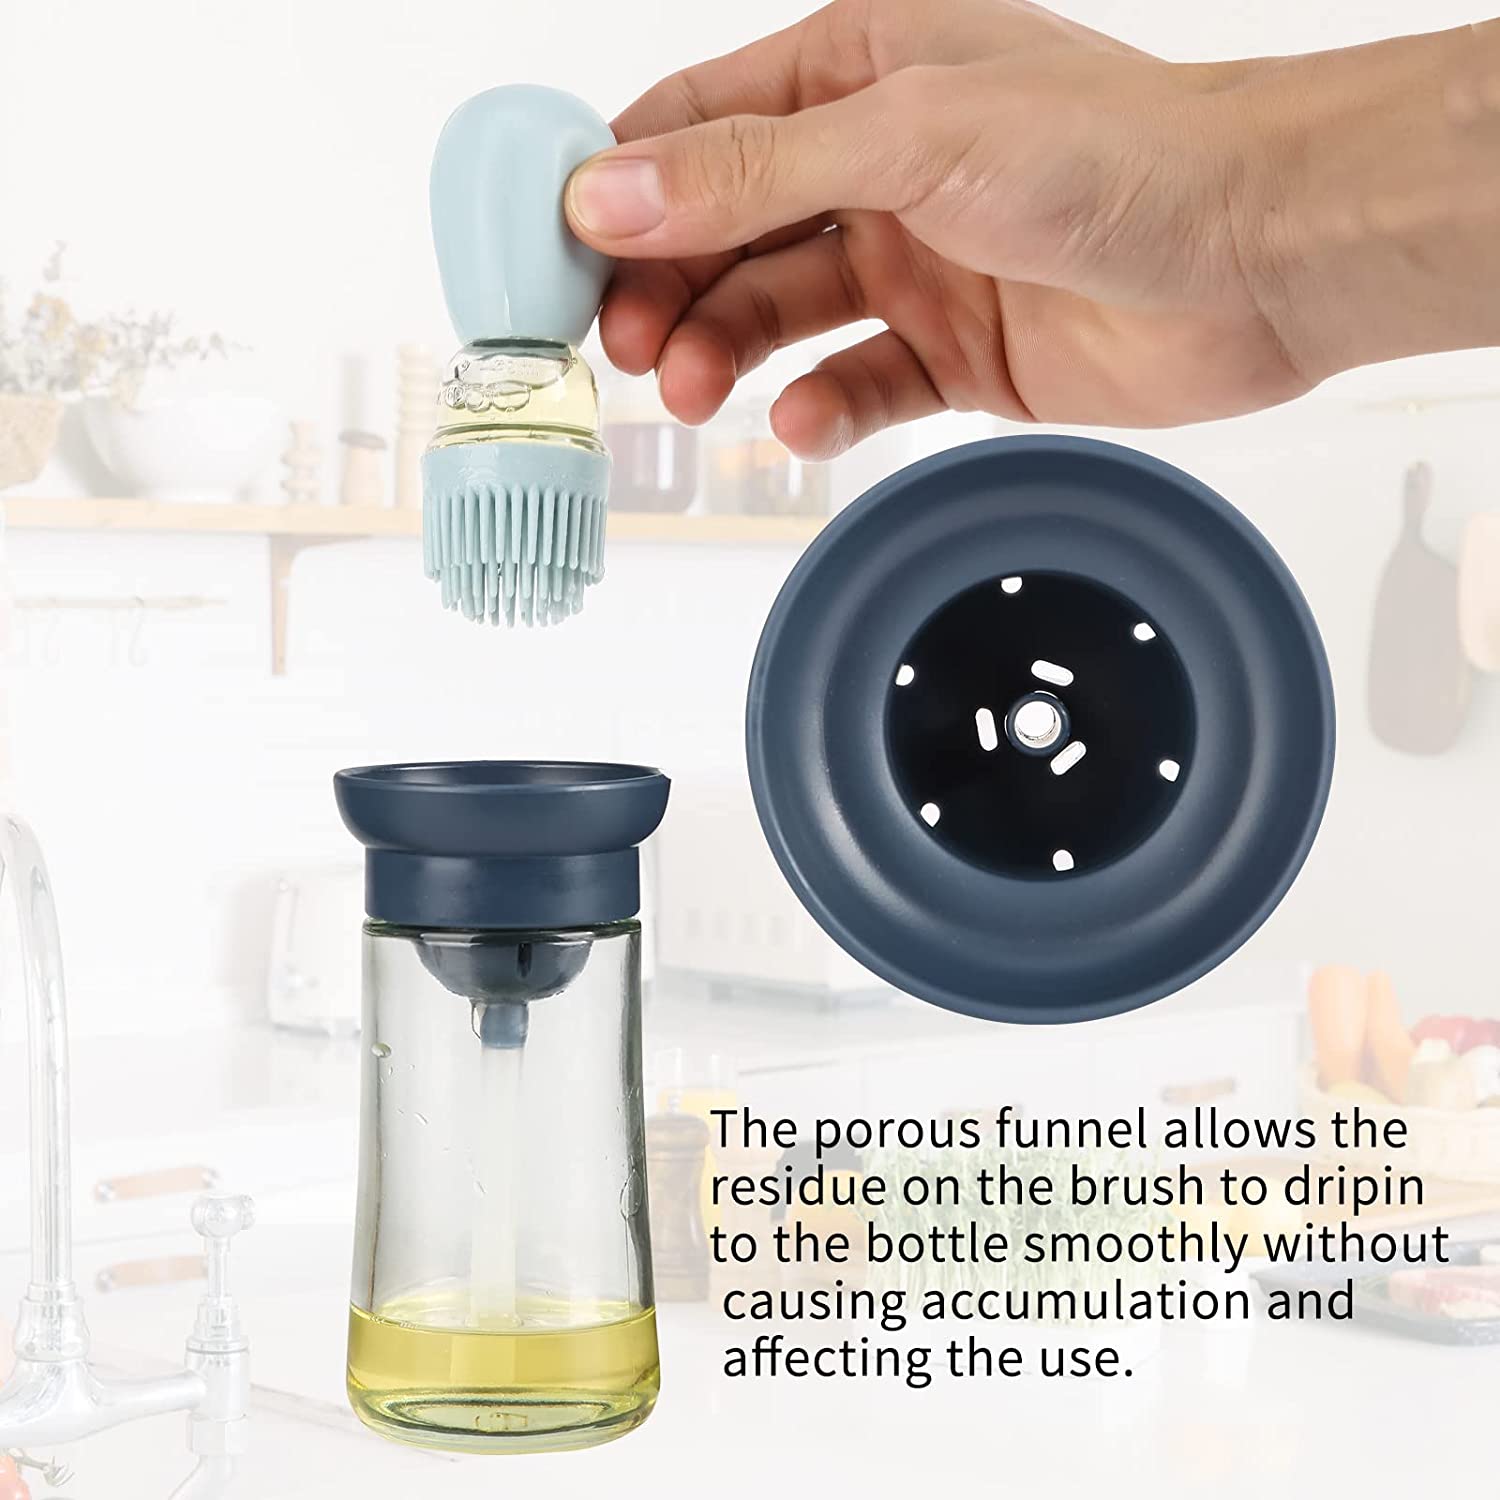 Glass Olive Oil Dispenser Bottle With Silicone Brush